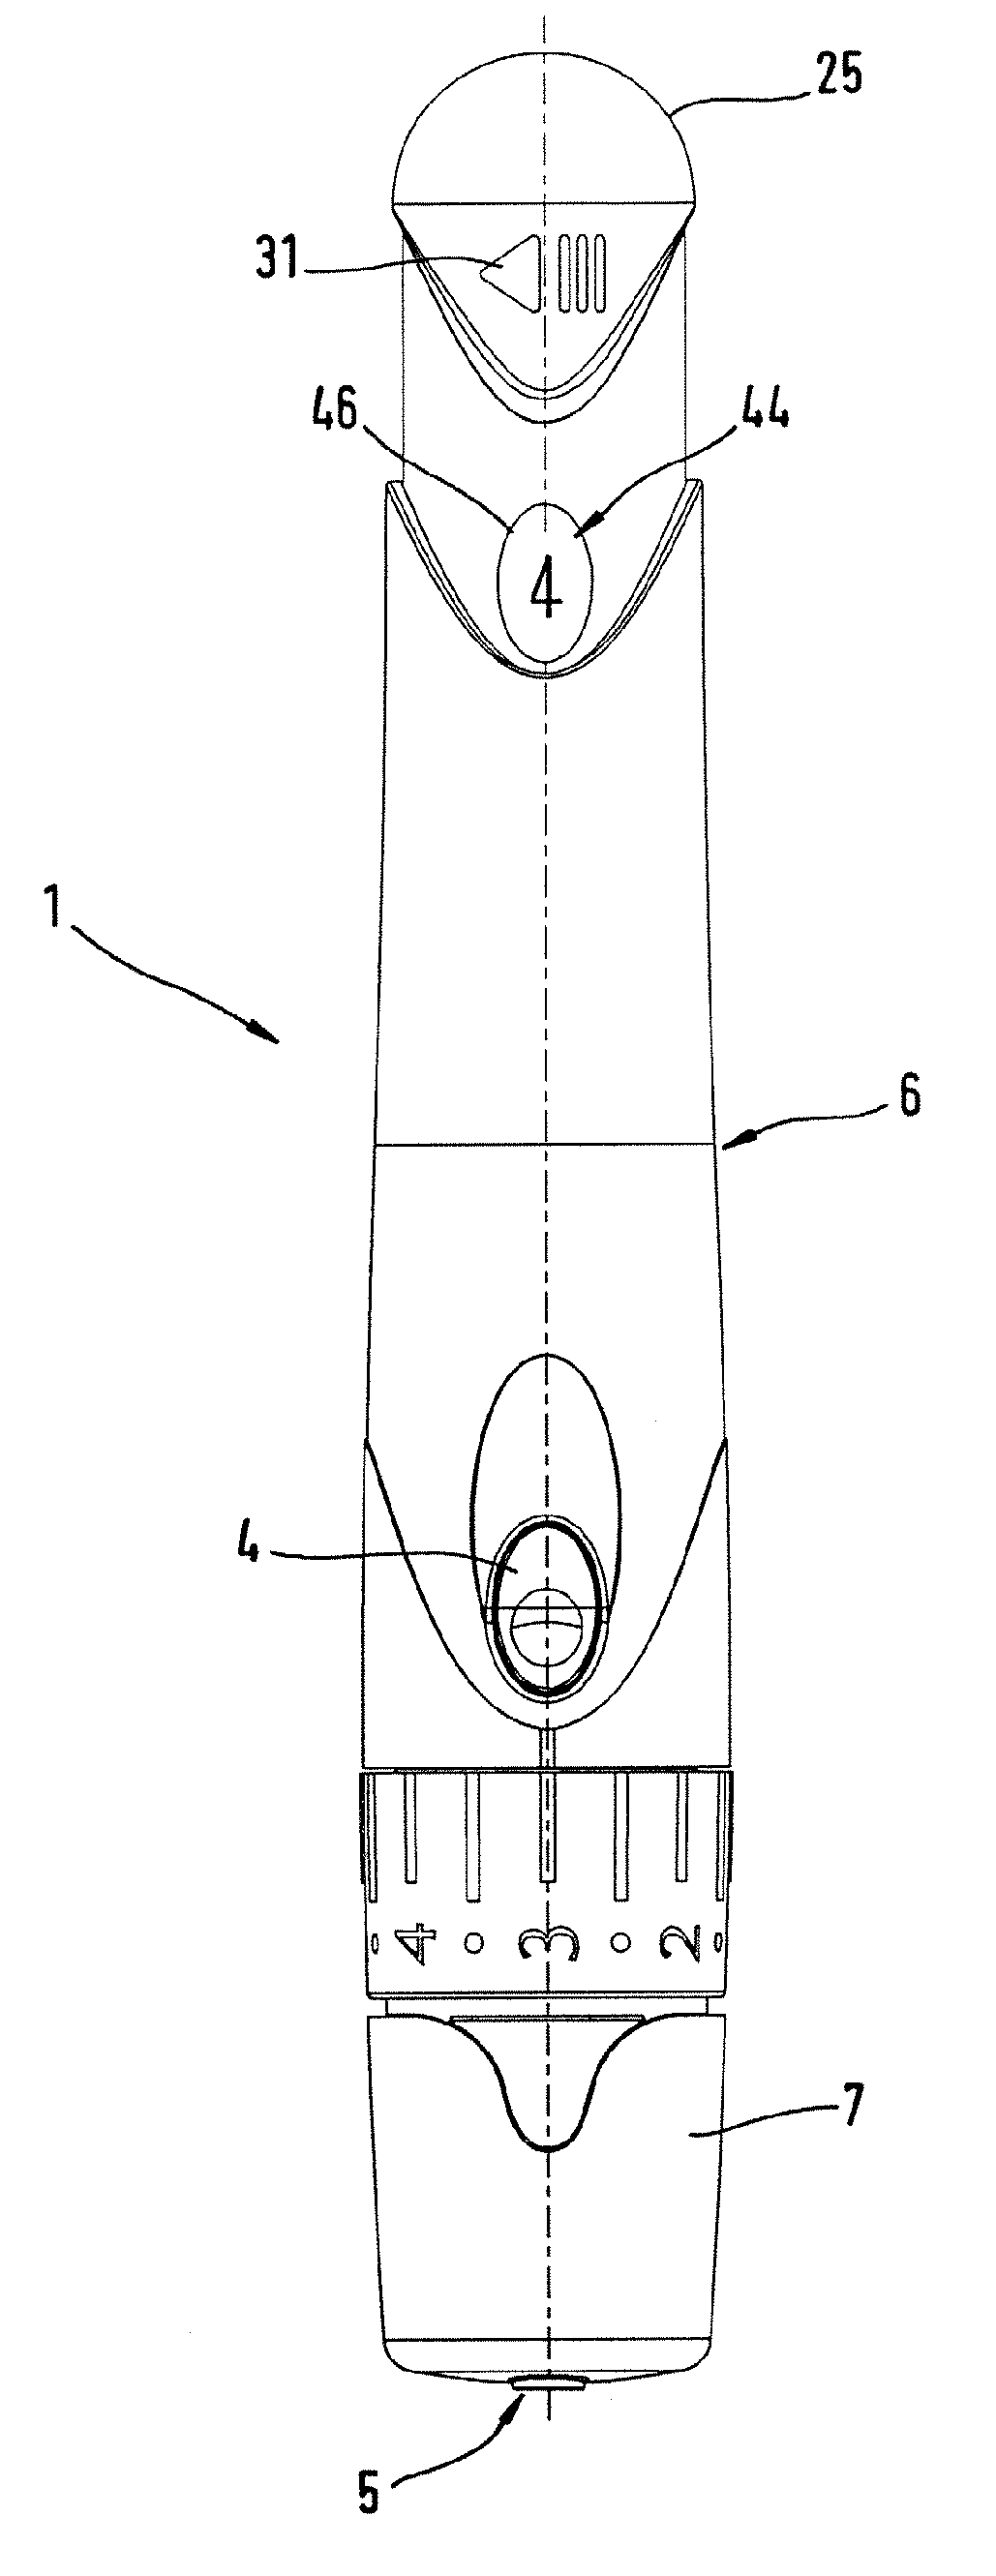 Lancing apparatus for producing a puncture wound